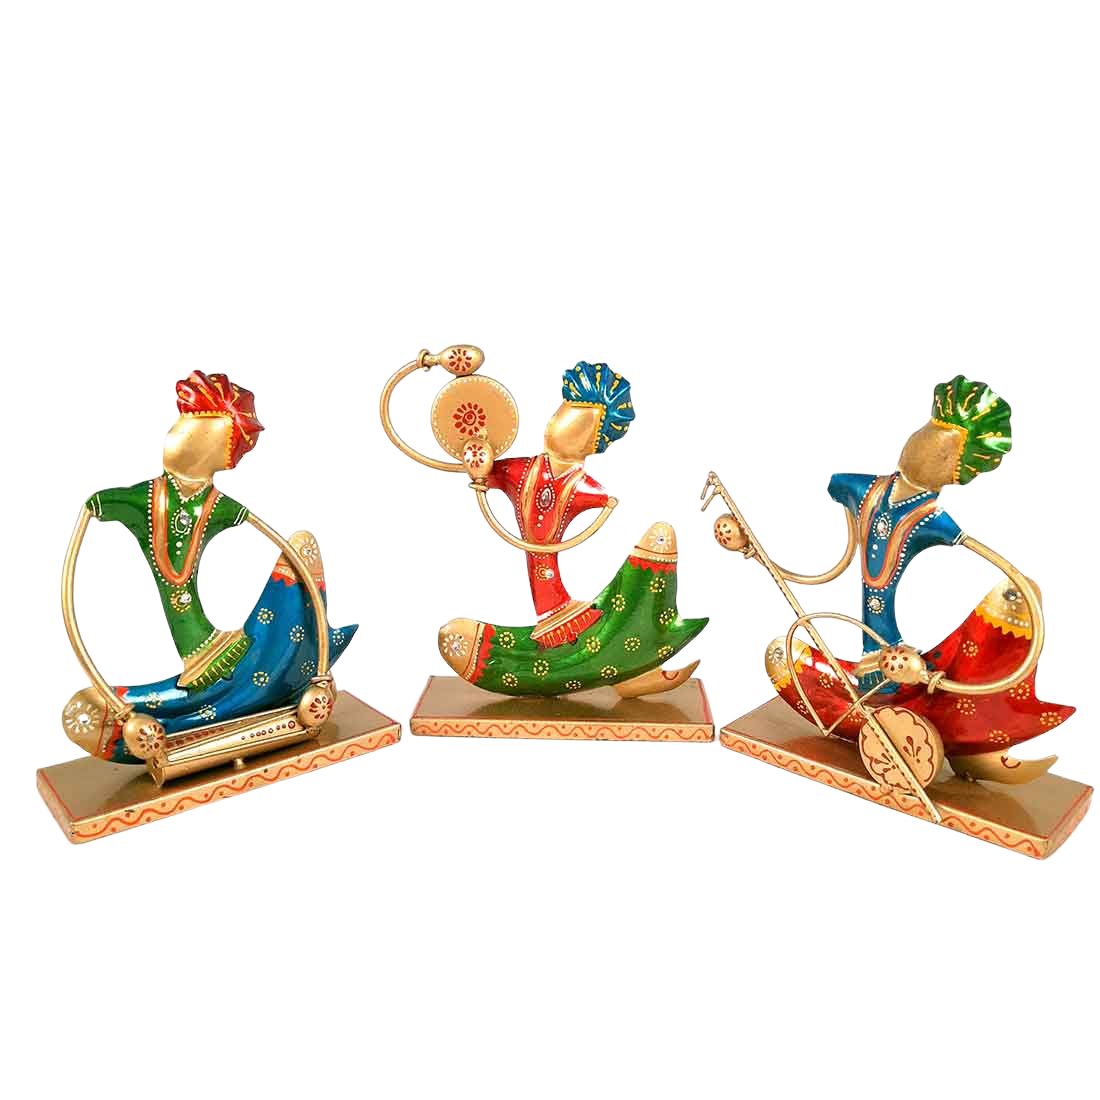 Musicians Showpiece - Playing Musical Instruments - For Table & Home Decor - 8 Inch -Set of  3